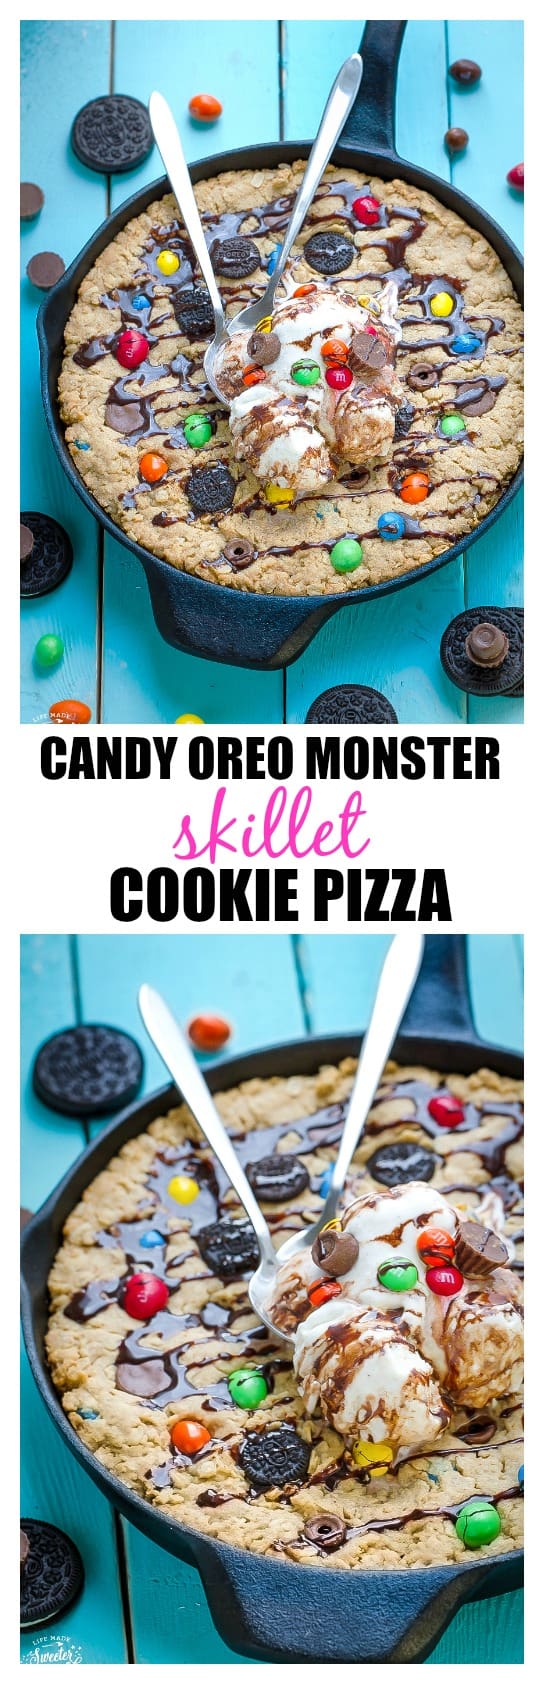 Candy Oreo Monster Skillet Cookie Pizza is the perfect way to use up leftover Halloween candy